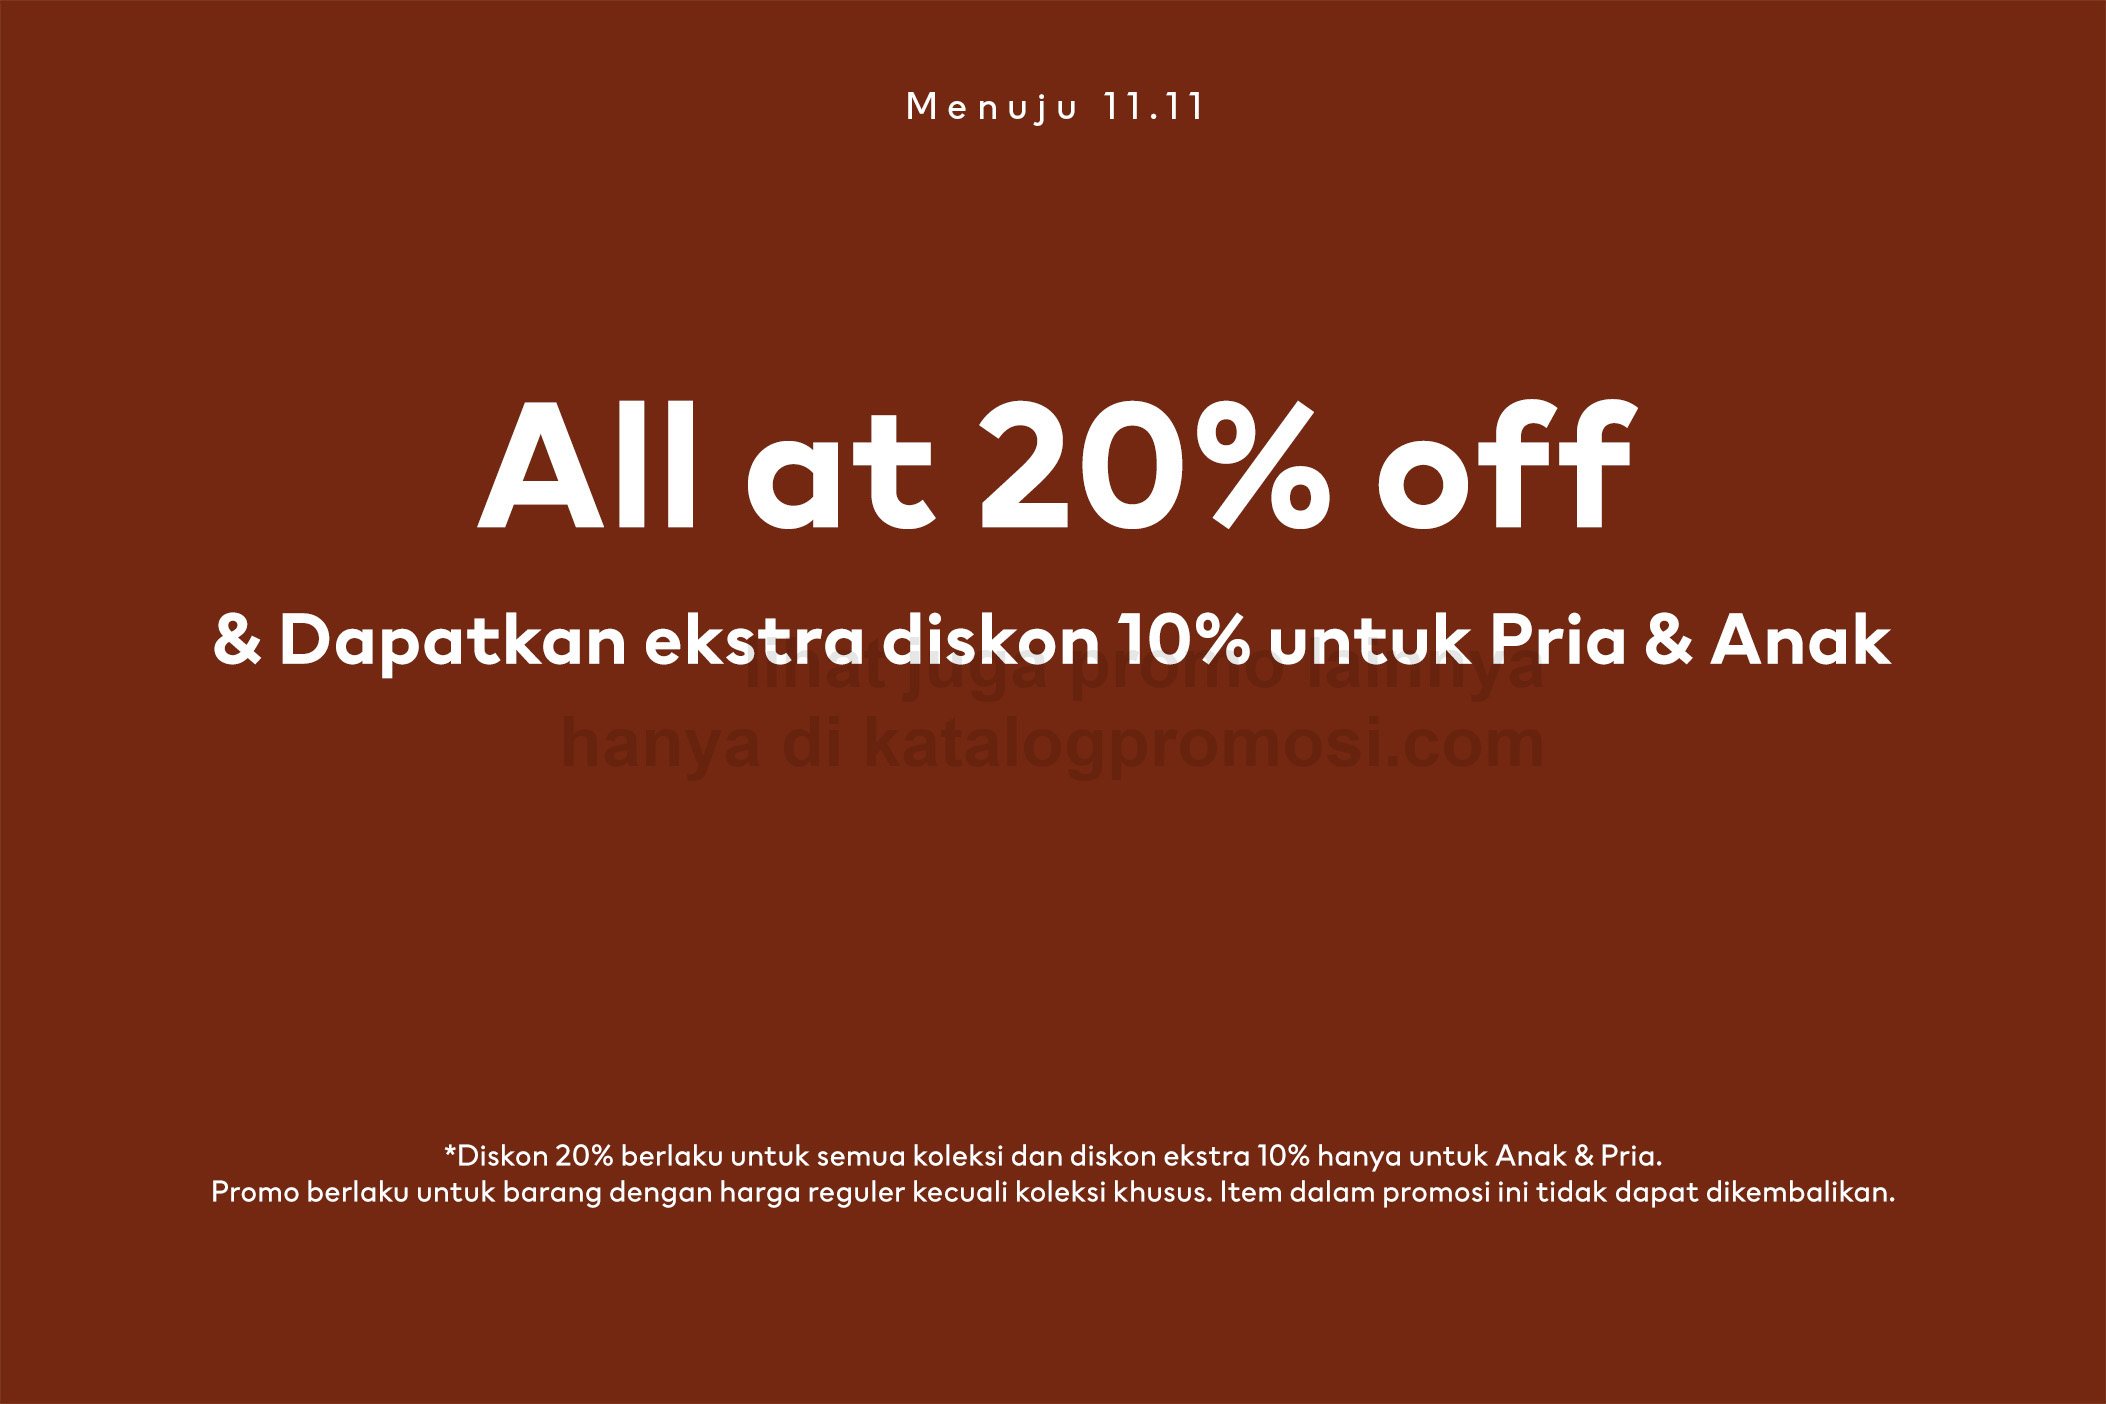 Promo H&M Online Exclusive - Road to 11.11 ! Discount 20% Off + EXTRA 10% off for Men & Kids items